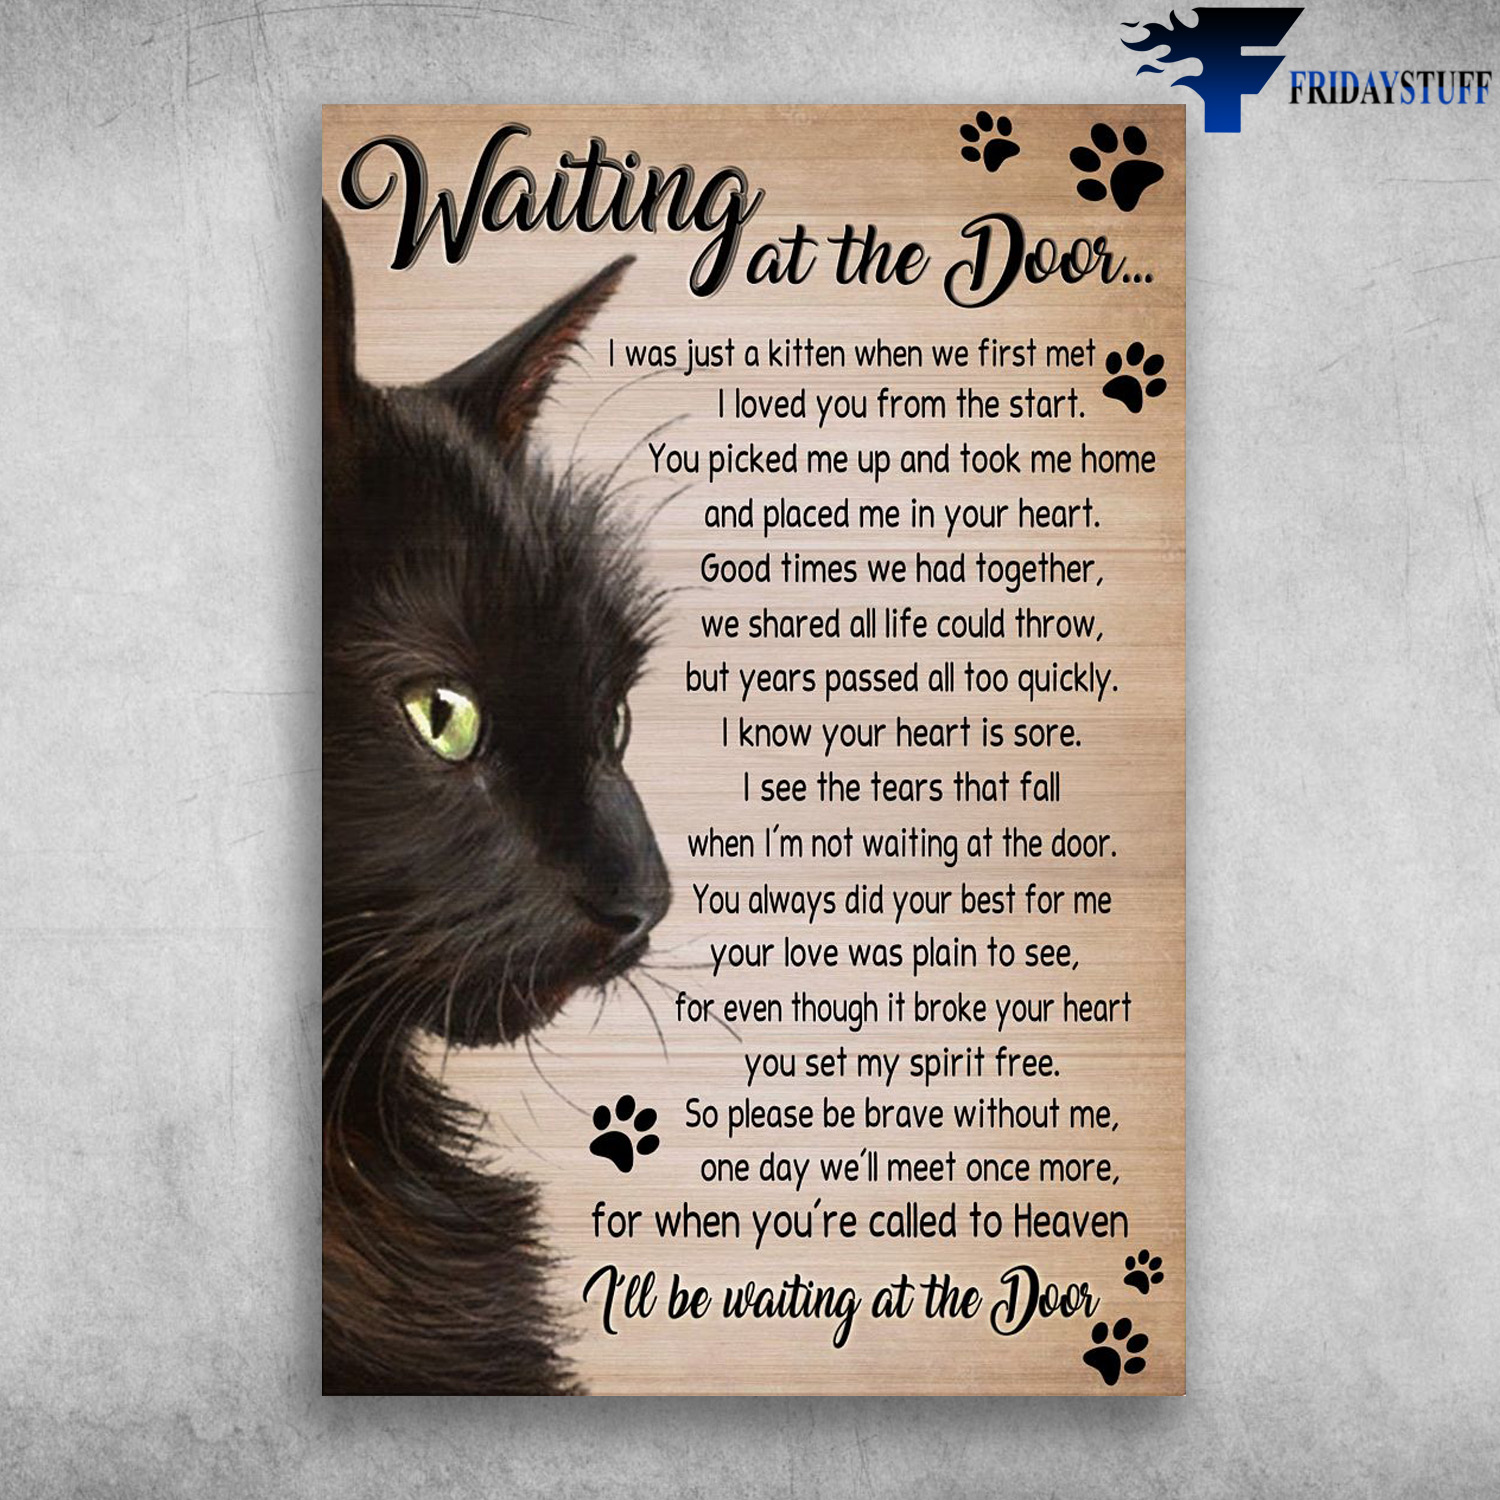 Black Cat - Waiting At The Door, I Was Just A Kitten When We First Met, I Loved You From The Start, You Picked Me Up And Took Me Home, And Placed Me In Your Heart, Good Times We Had Together, We Shared All Life Could Throw